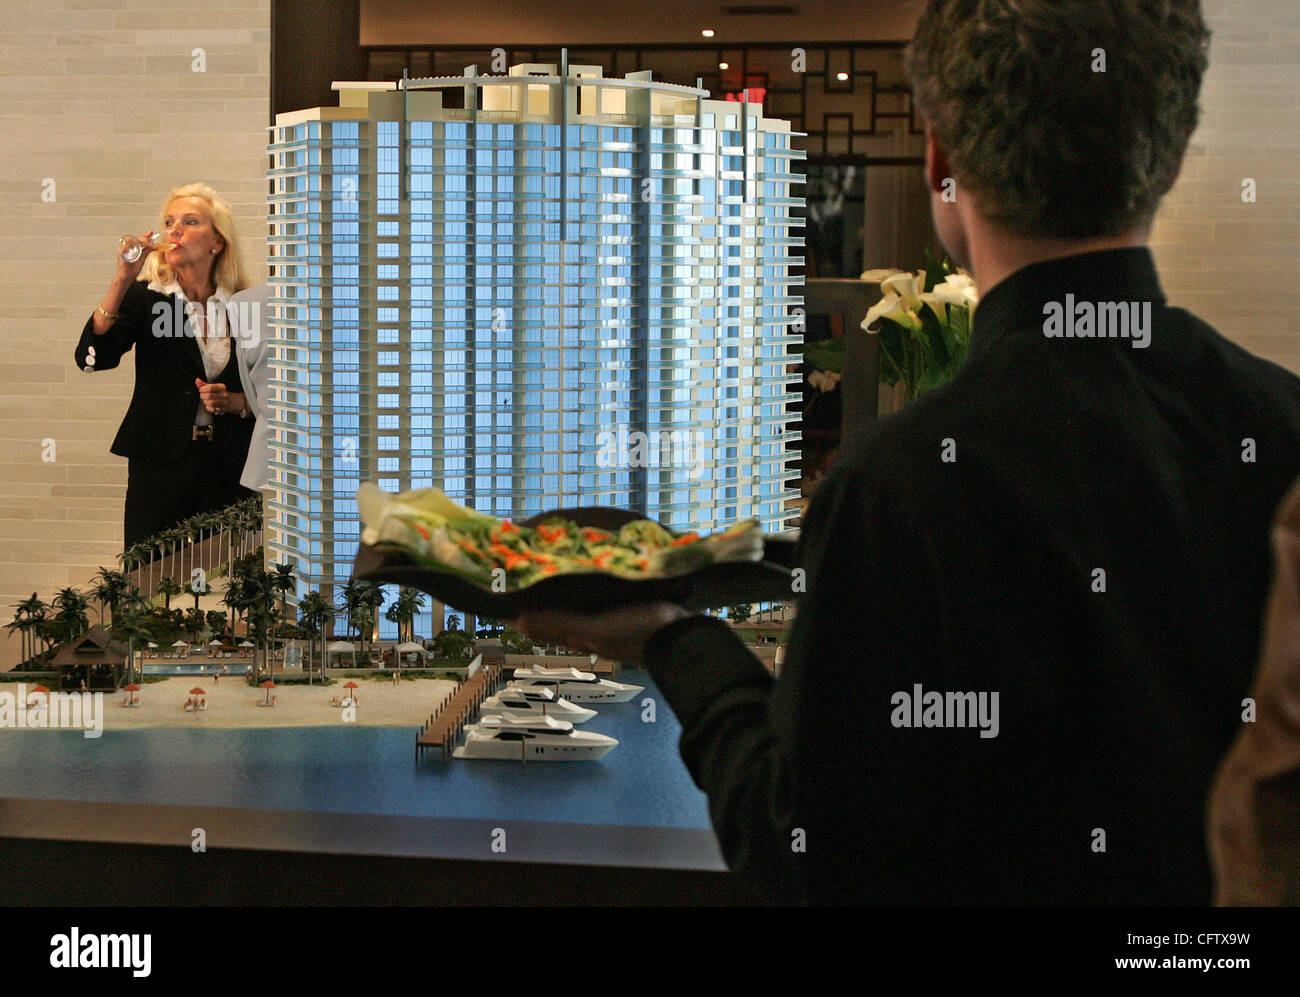 012607 biz trump Staff Photo Allen Eyestone/The Palm Beach Post-0032817A-West Palm Beach, FL... A model of the Trump Tower Palm Beach in the sales center. Real estate mogul Donald Trump unveiled his new condo project in partnership with the Related Group. It is called Trump Tower Palm Beach and it w Stock Photo